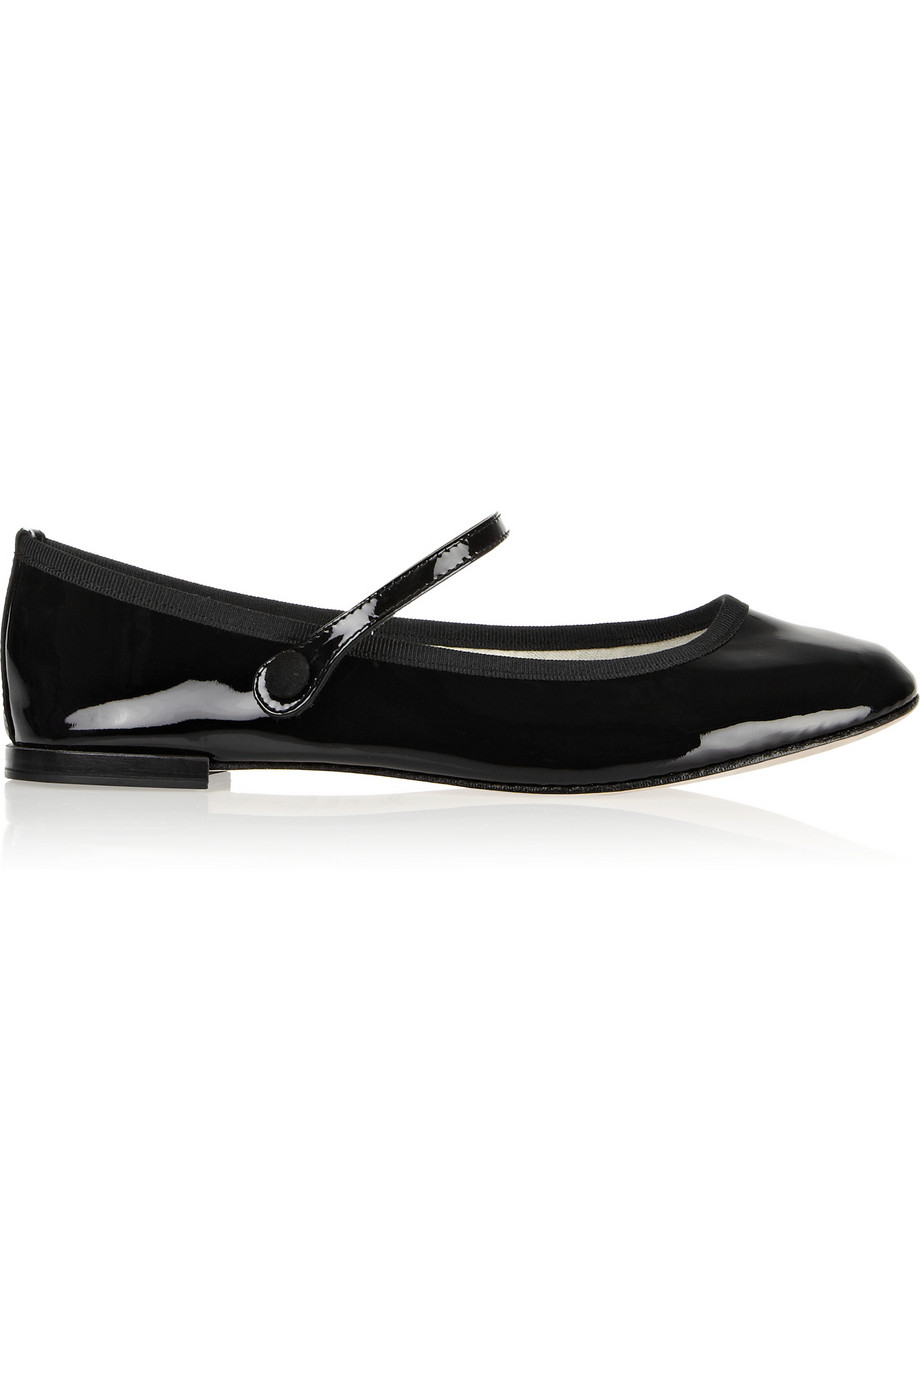 Repetto Lio Patent-Leather Mary Jane Ballet Flats in Black - Lyst